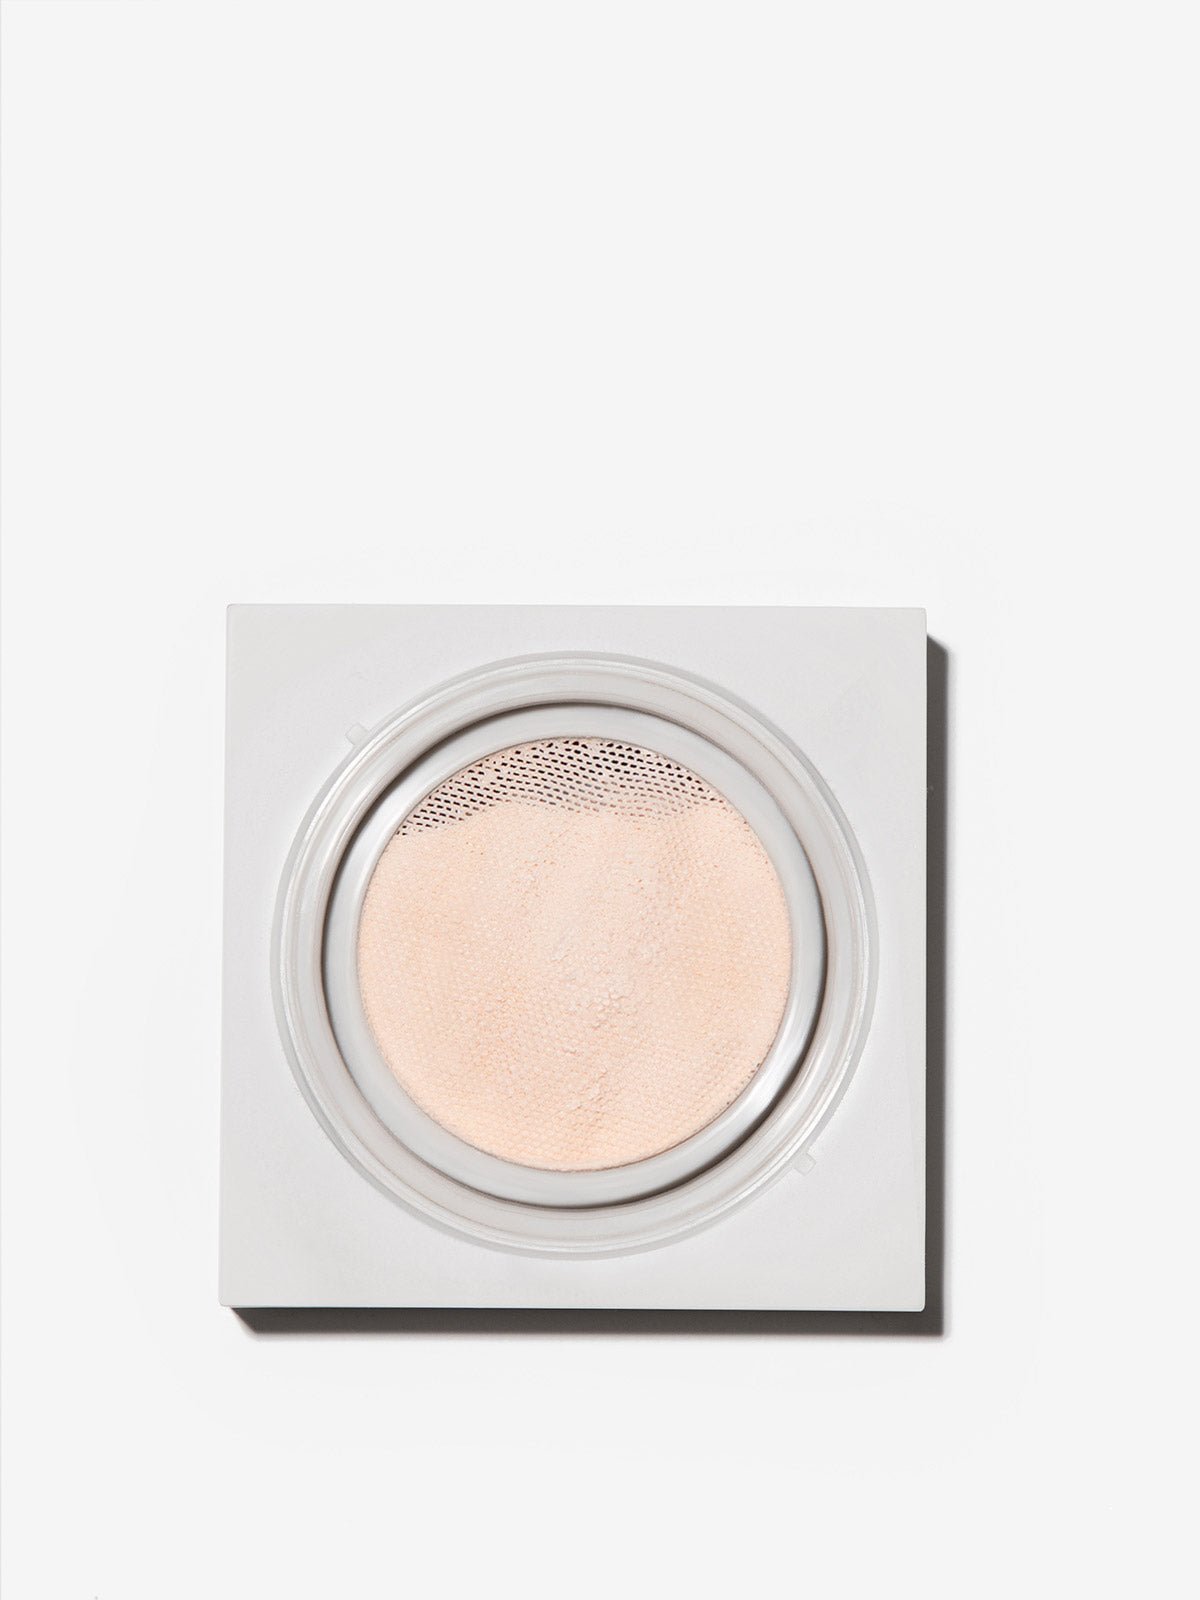 FRONT IMAGE OF REFY SKIN FINISH IN SHADE 02. TRANSLUCENT POWDER WITH PINK UNDERTONE